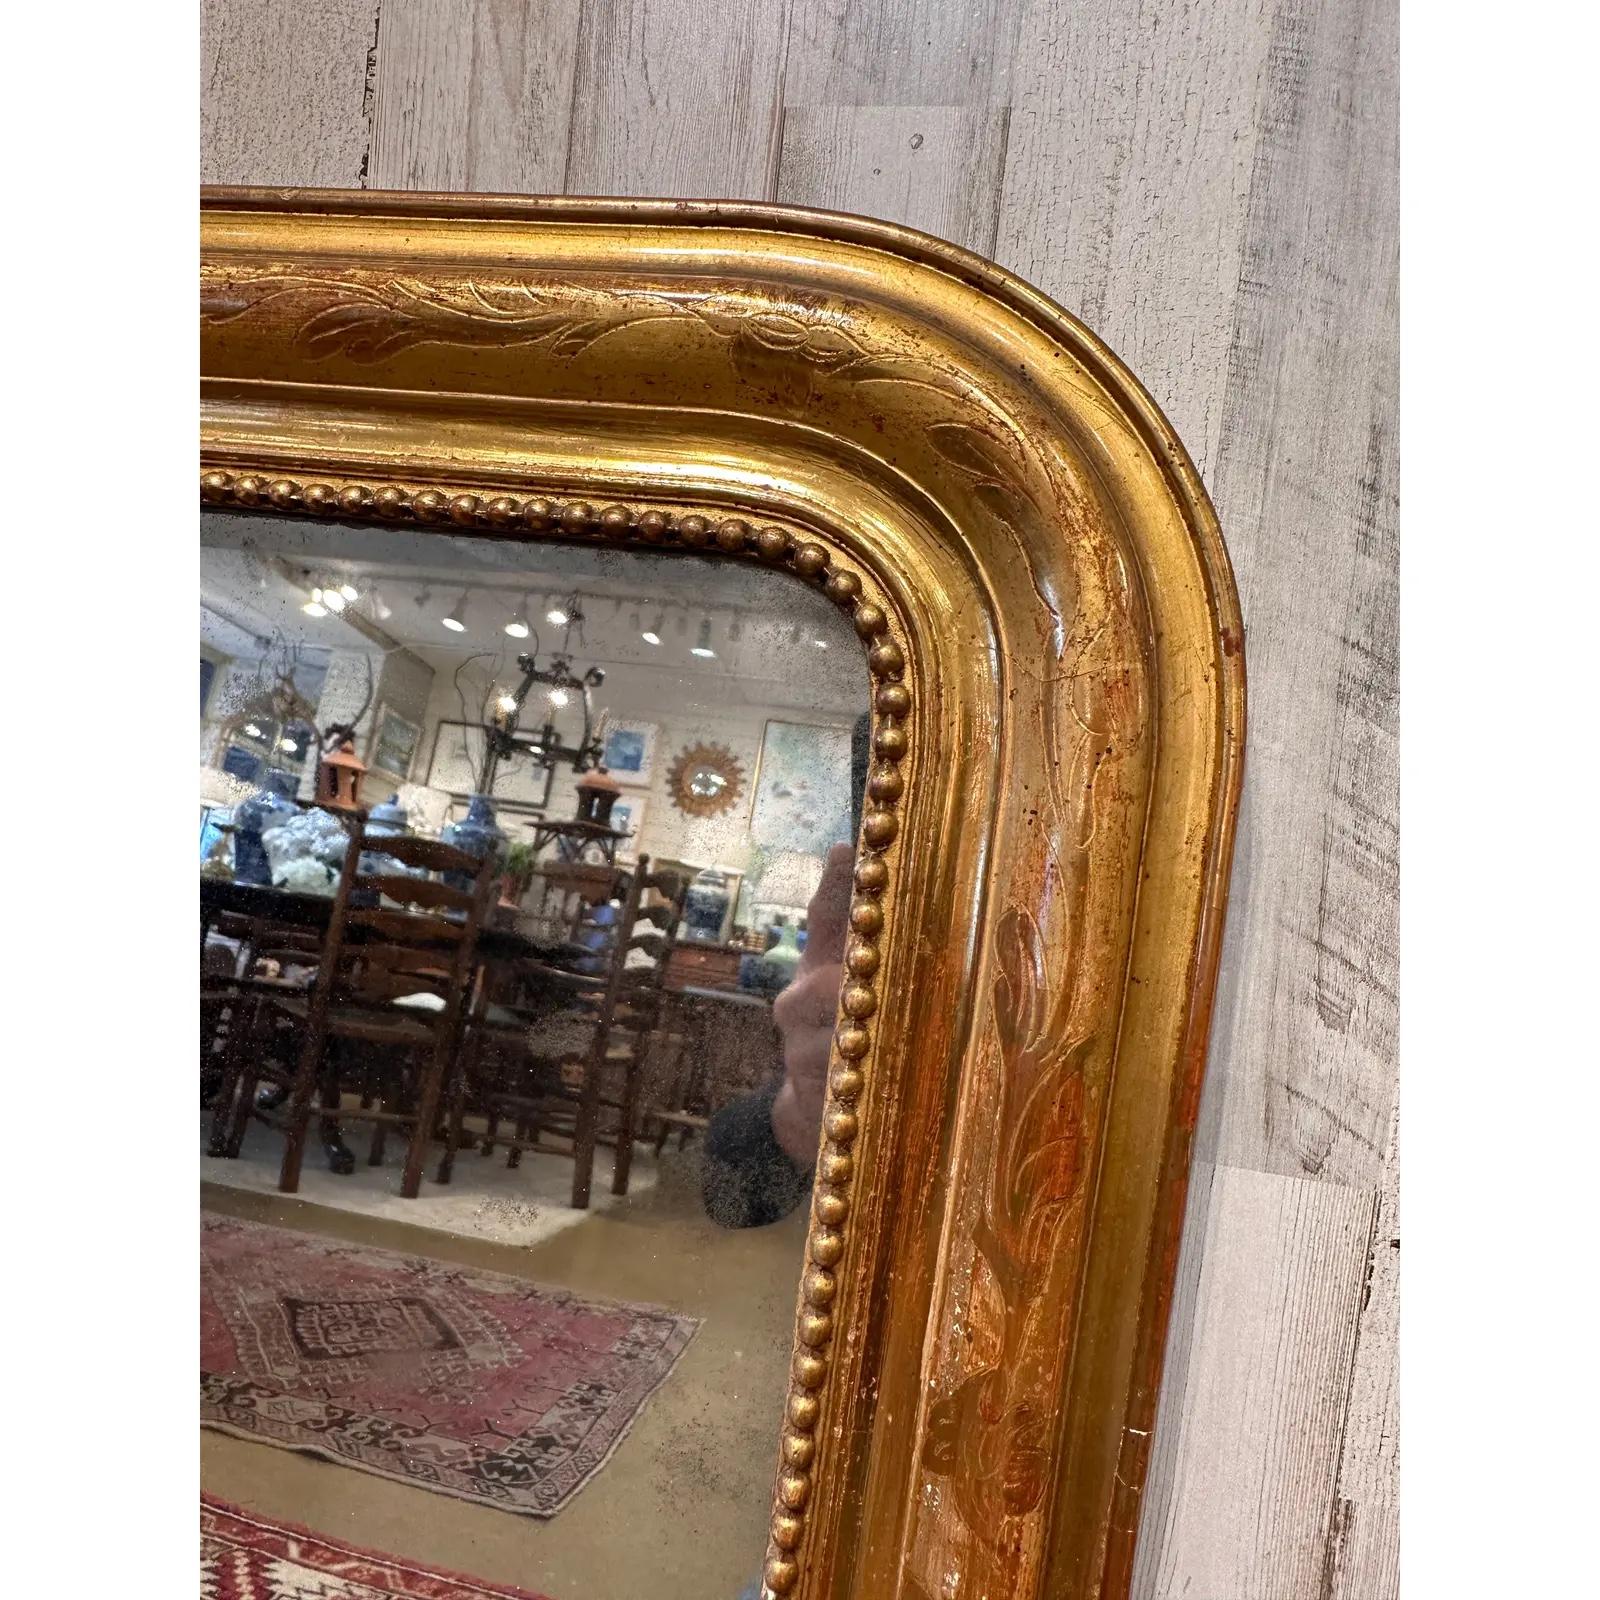 his exquisite Antique Louis Philippe Mirror, adorned with a gilded finish, effortlessly brings timeless charm to any space. Its ornate detailing and classic design make it a captivating centerpiece, reflecting both style and history in a single